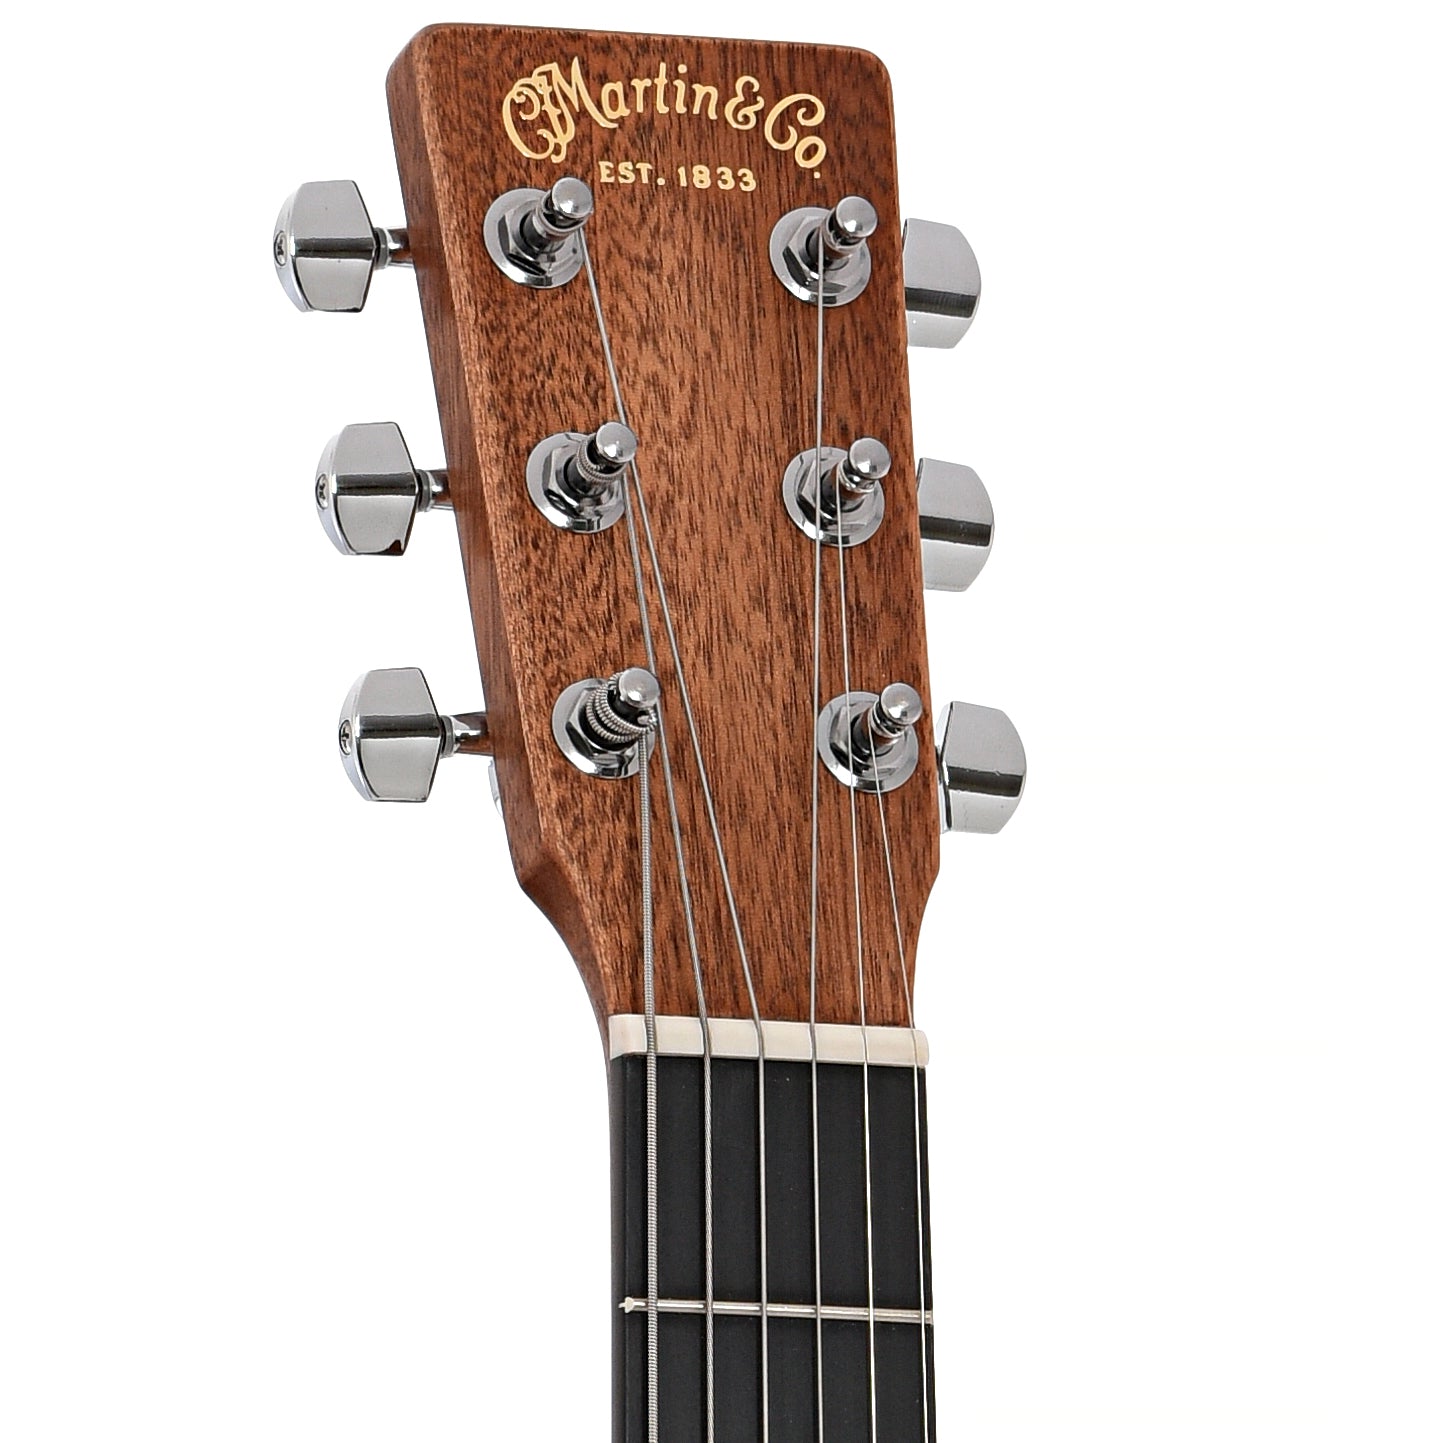 Front headstock of Martin 000CJR-10E StreetMaster